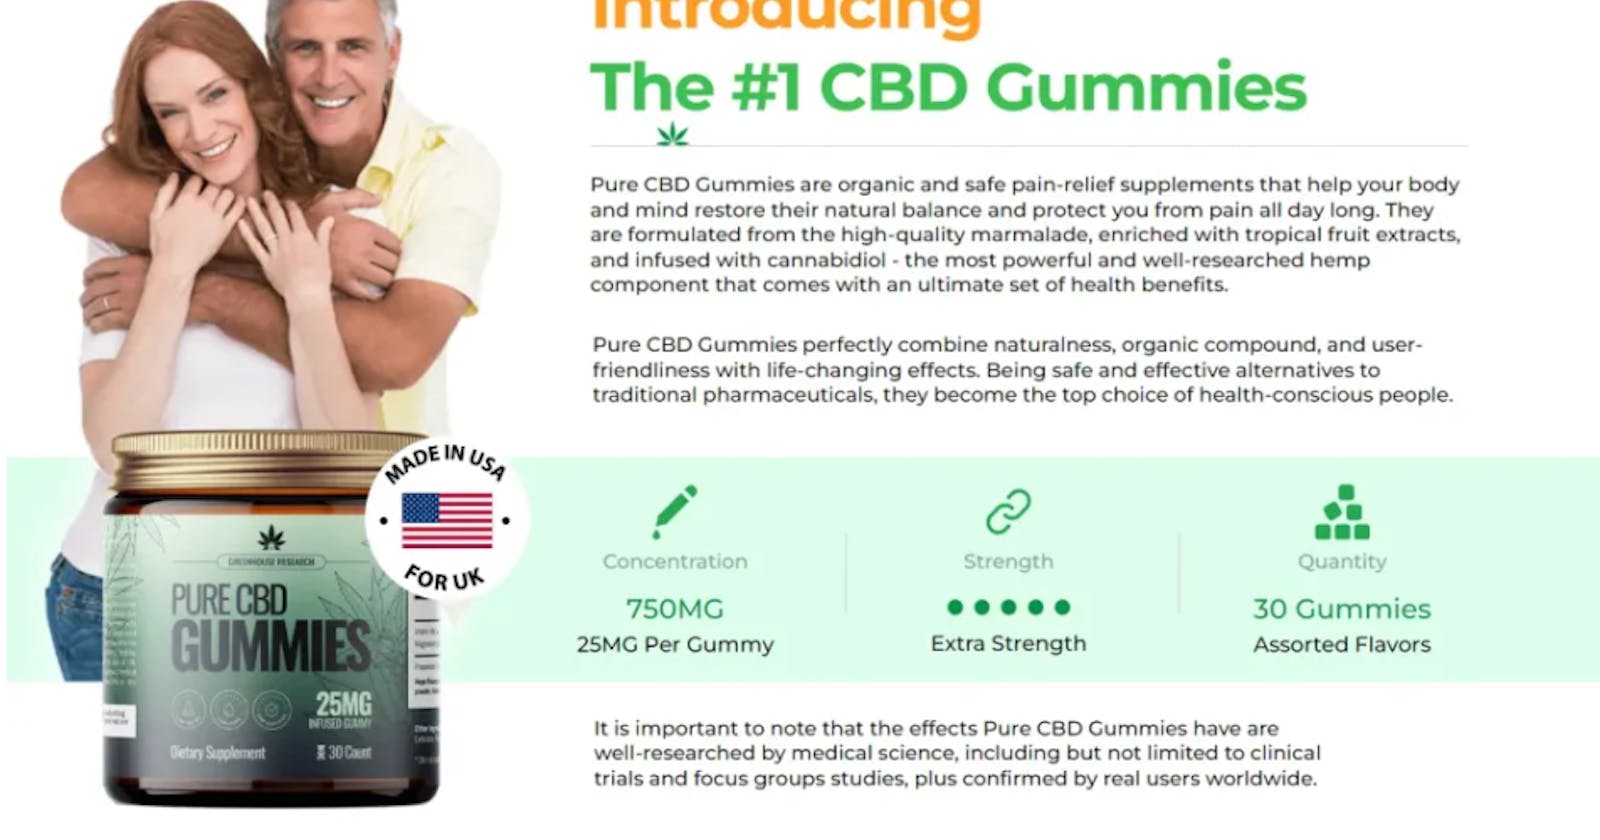 Organic CBD Gummies Reviews Is it Safe for Health? Must Read This!